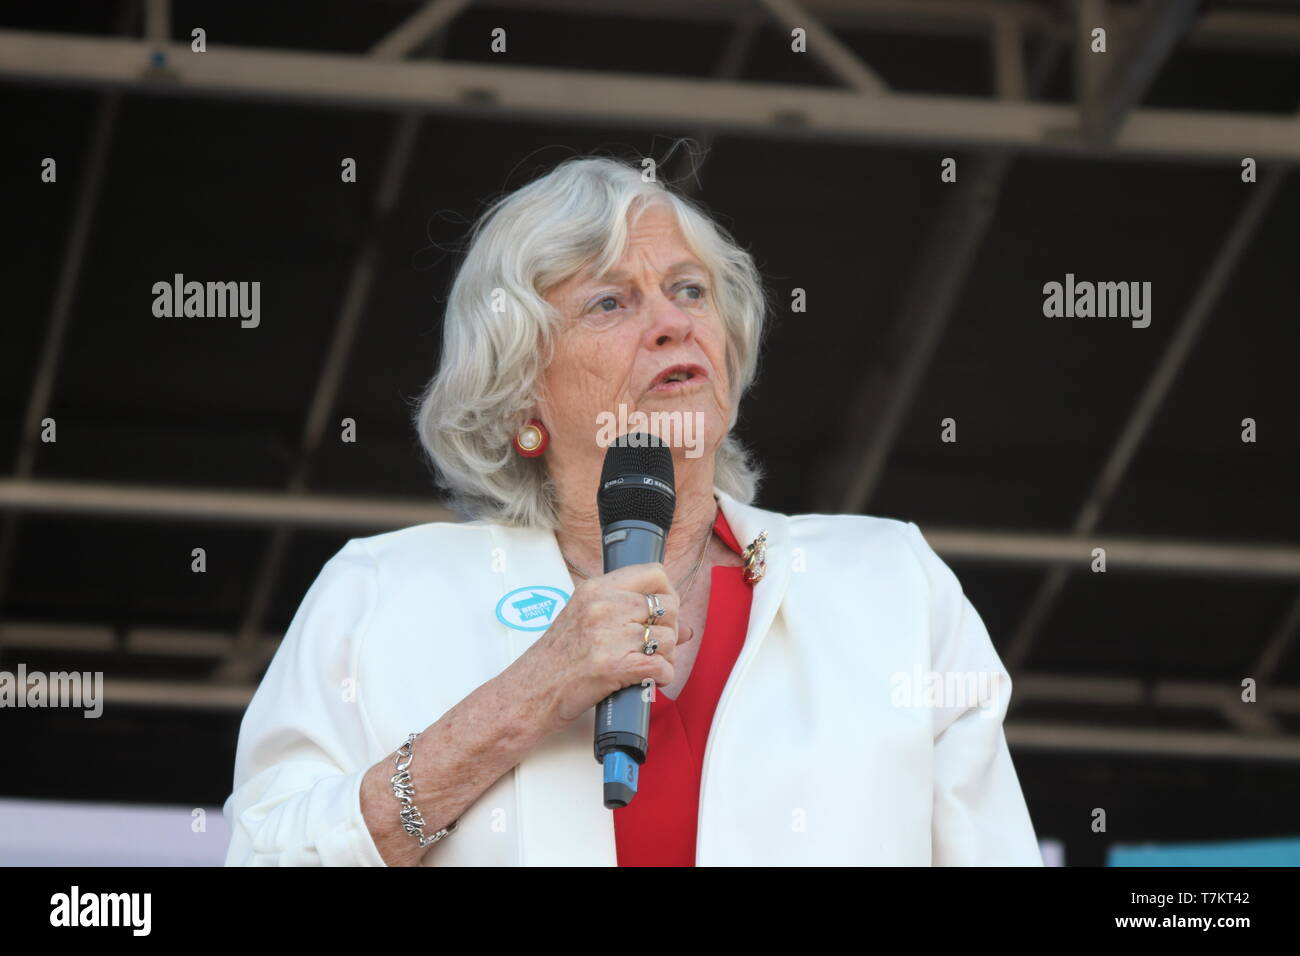 Ann Widdecombe speaking at the Brexit party rally in Chester, the event was attended by around 350 people Stock Photo